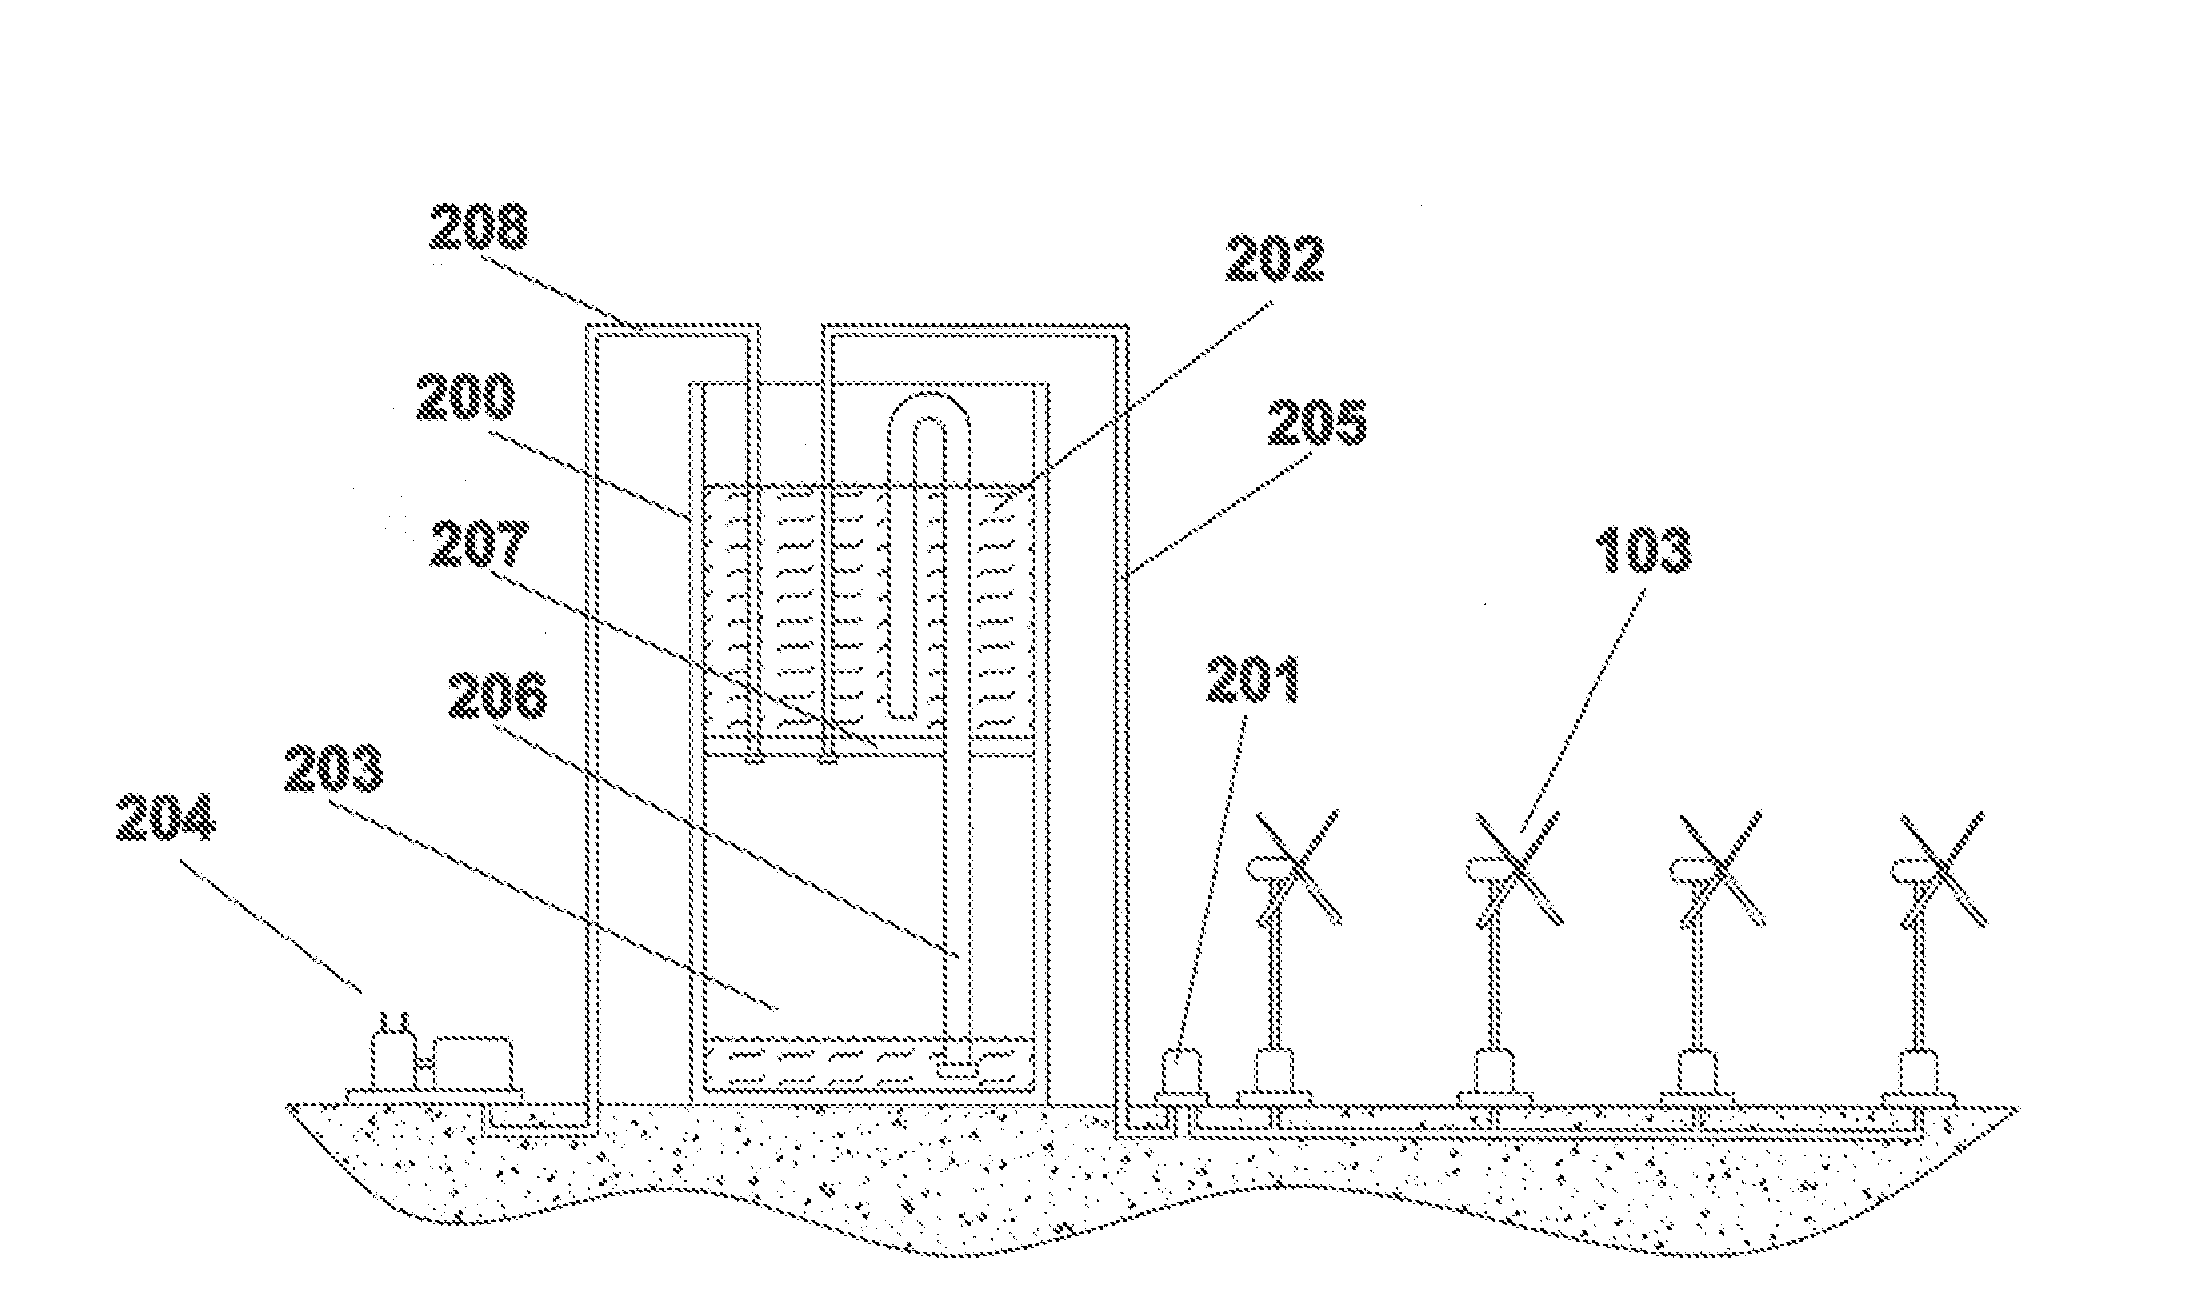 Integrated wind-power electrical generation and compressed air energy storage system